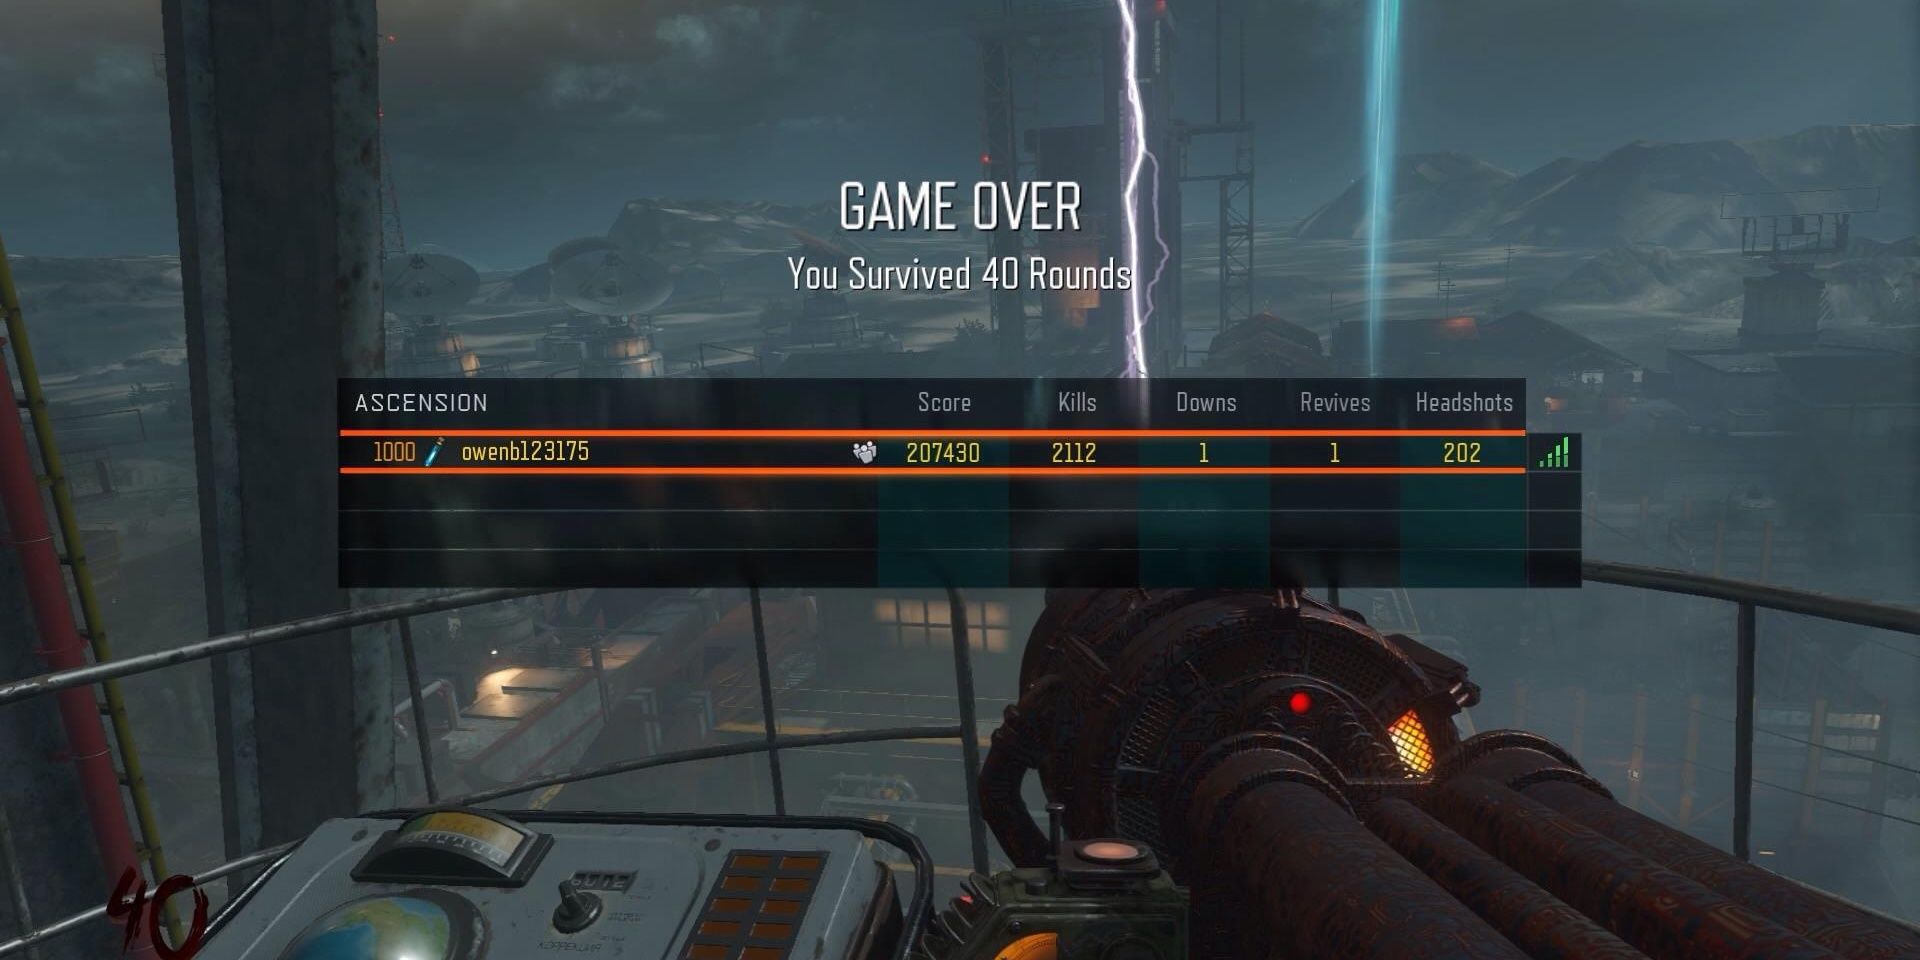 Game Over screen on Ascension zombie map Black Ops